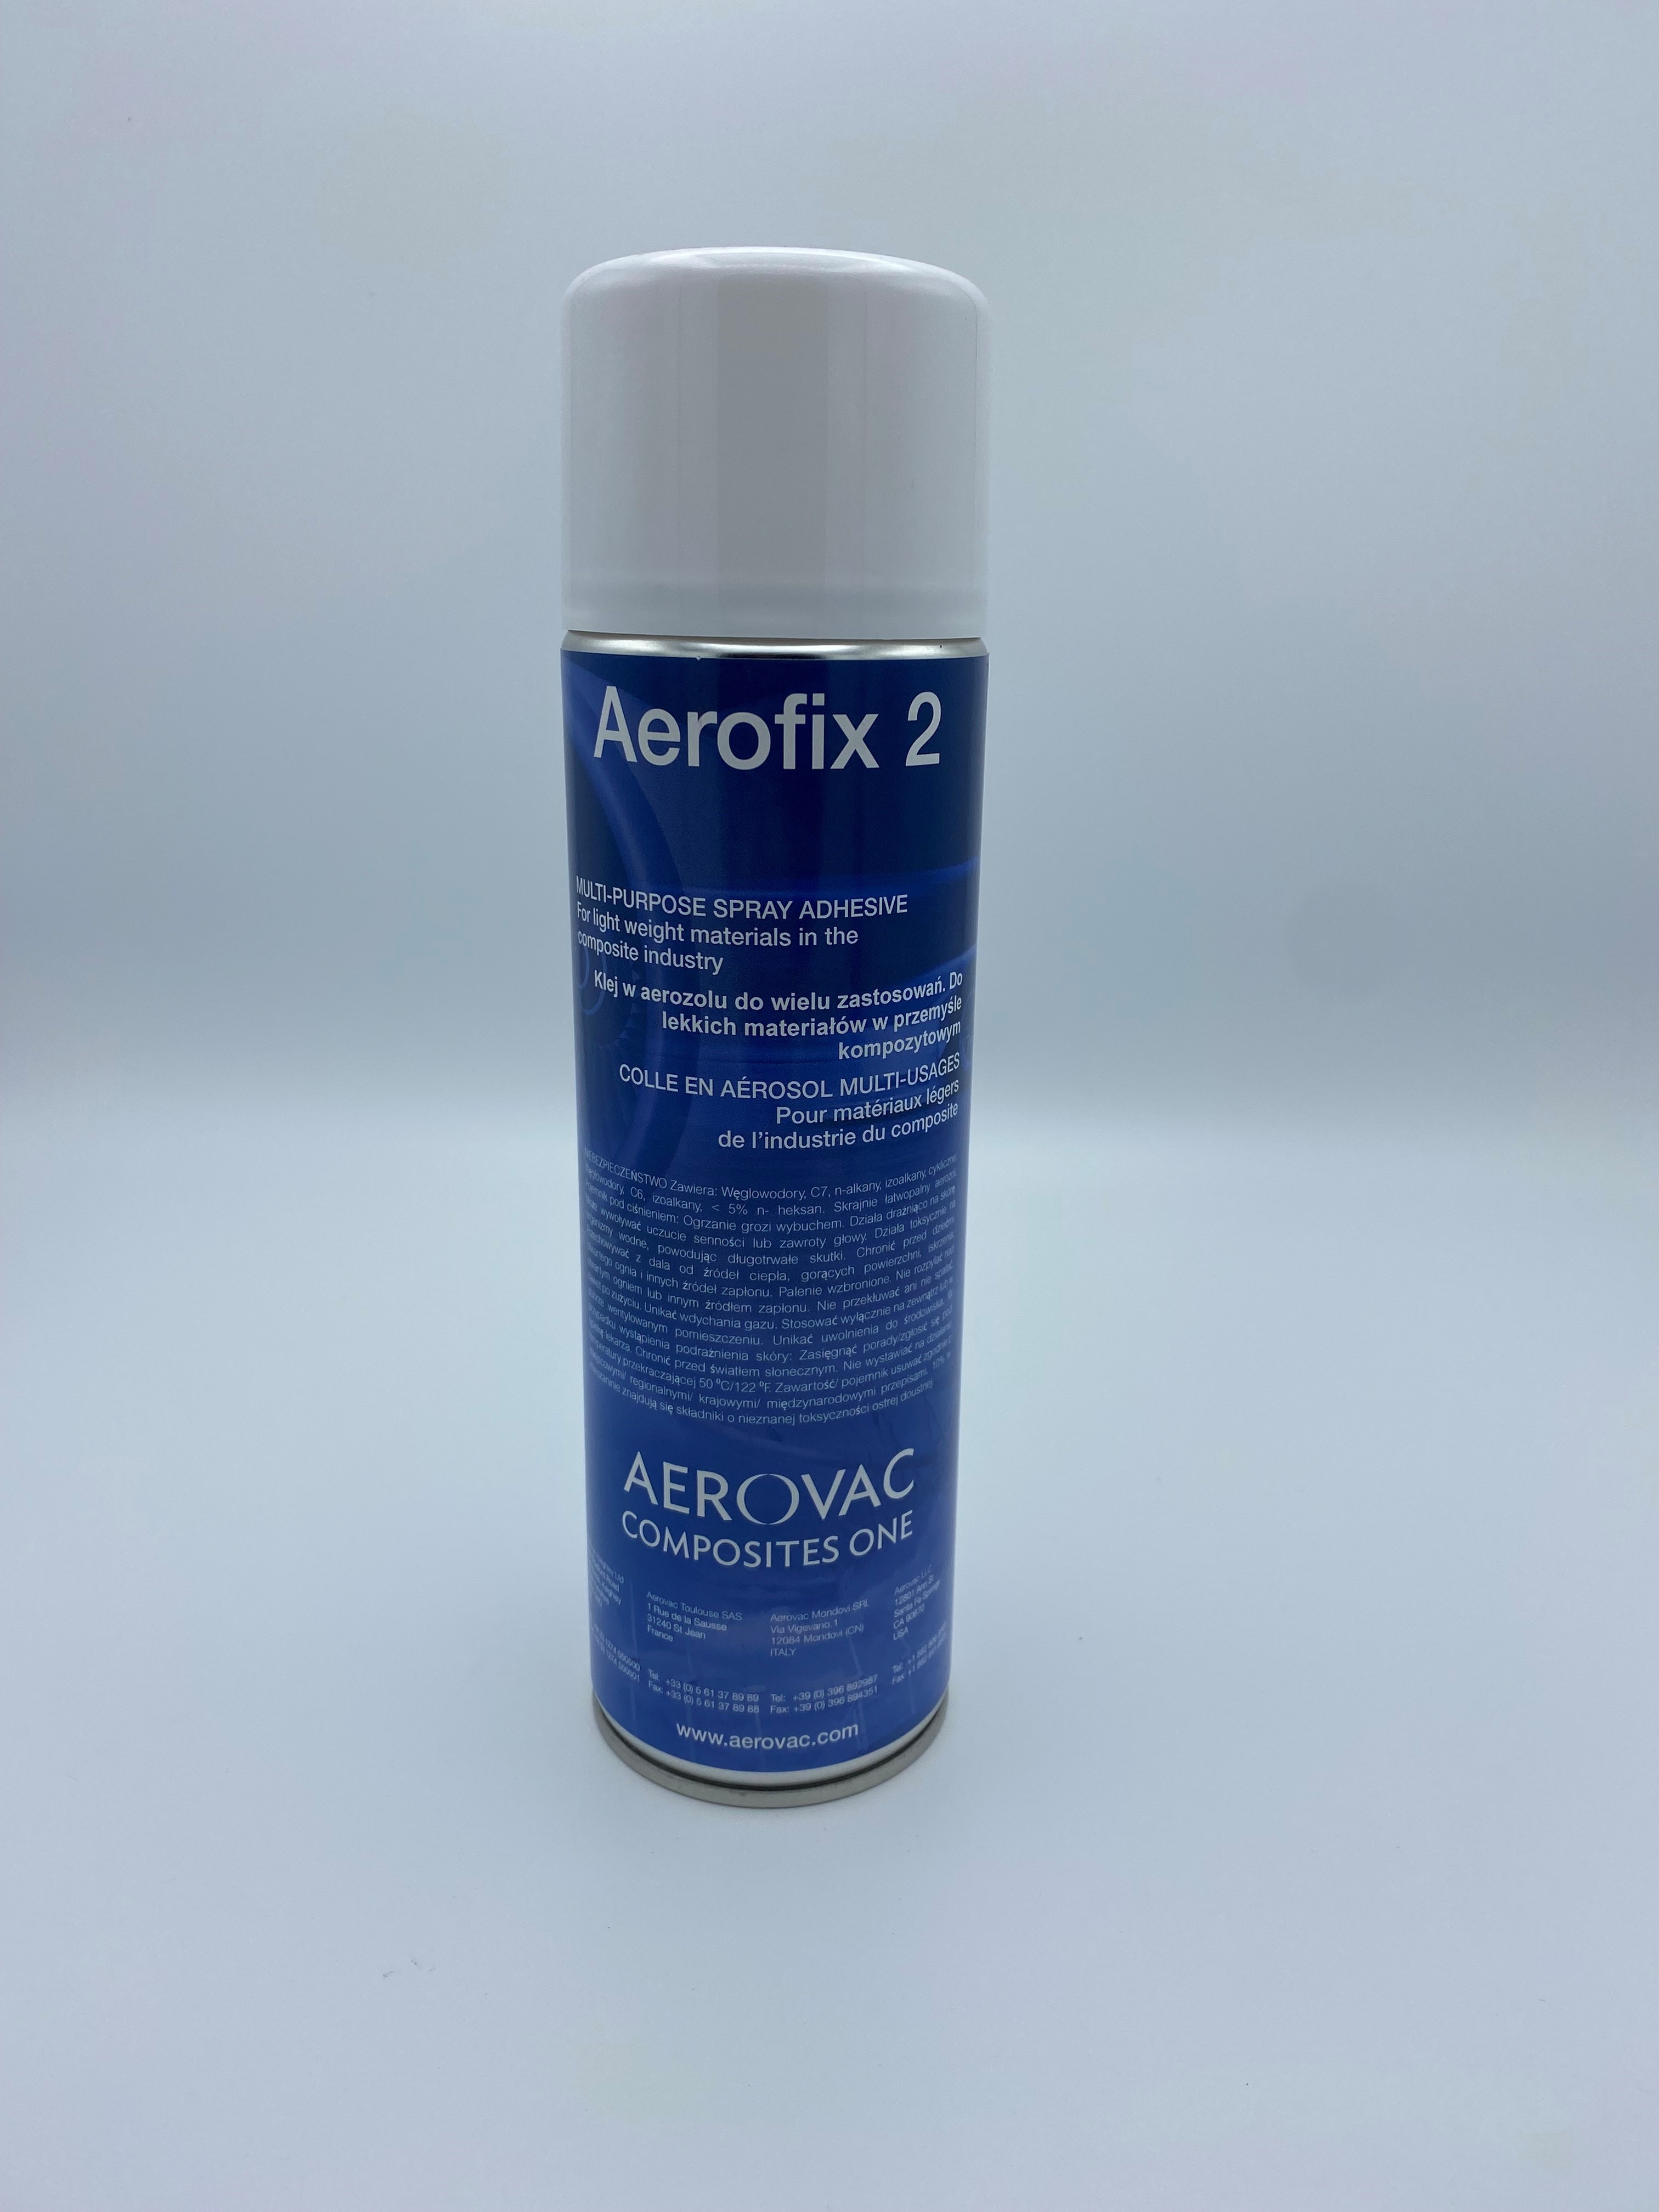 Econotac 2 17OZ, Economical Contact Spray Adhesive, Aircraft products, airtech--resin-infusion-products